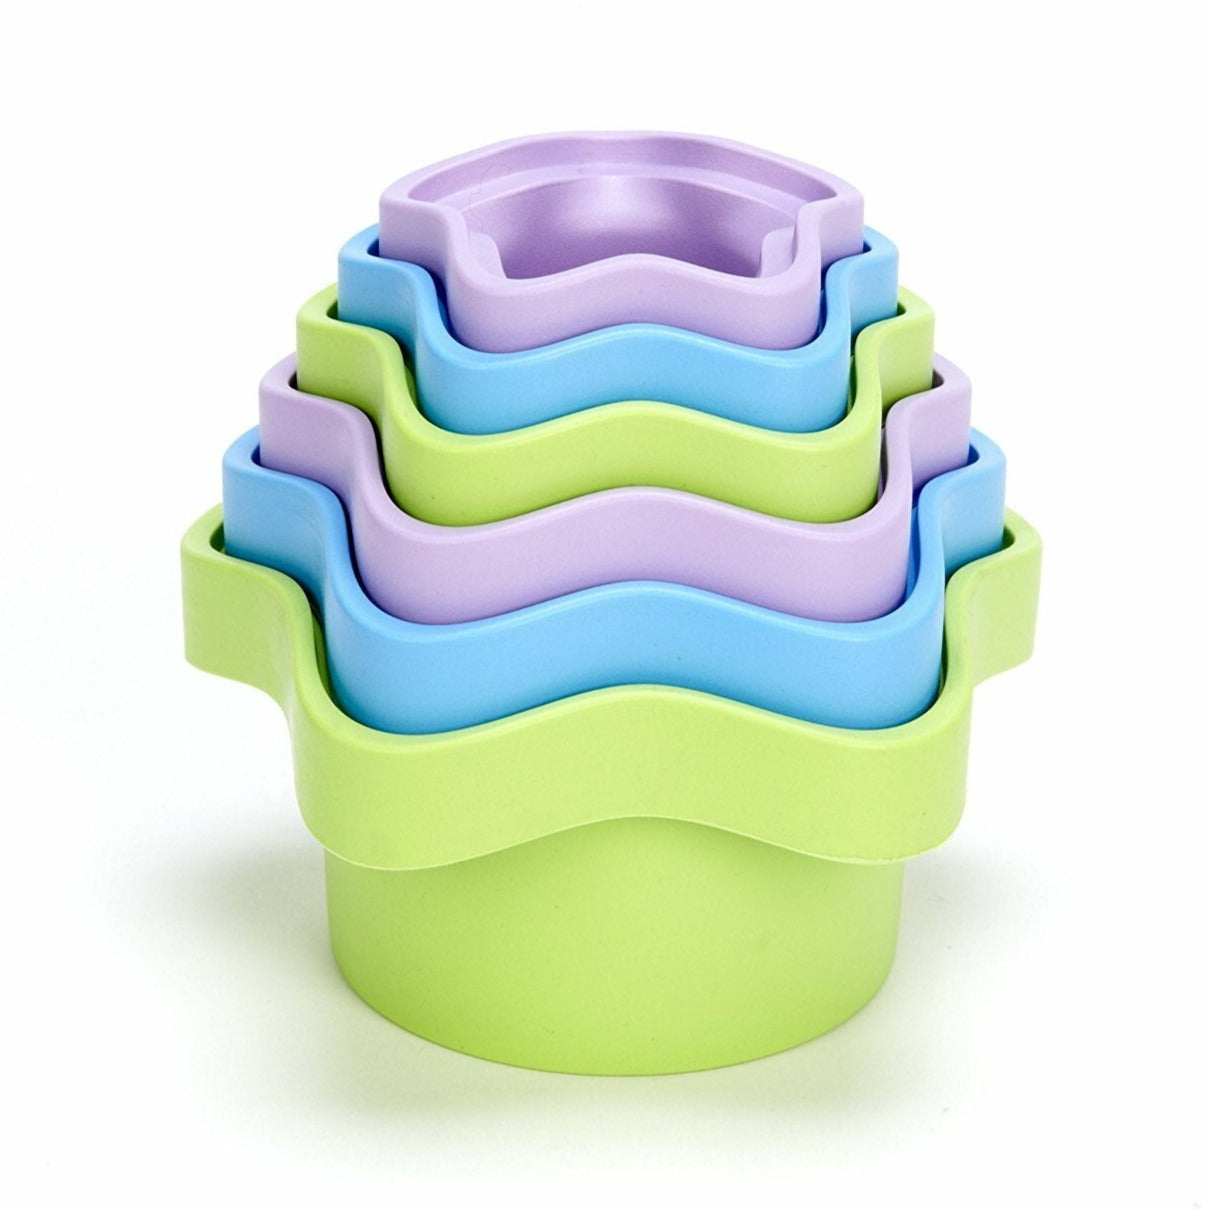 Green Toys: Pyramid from cups